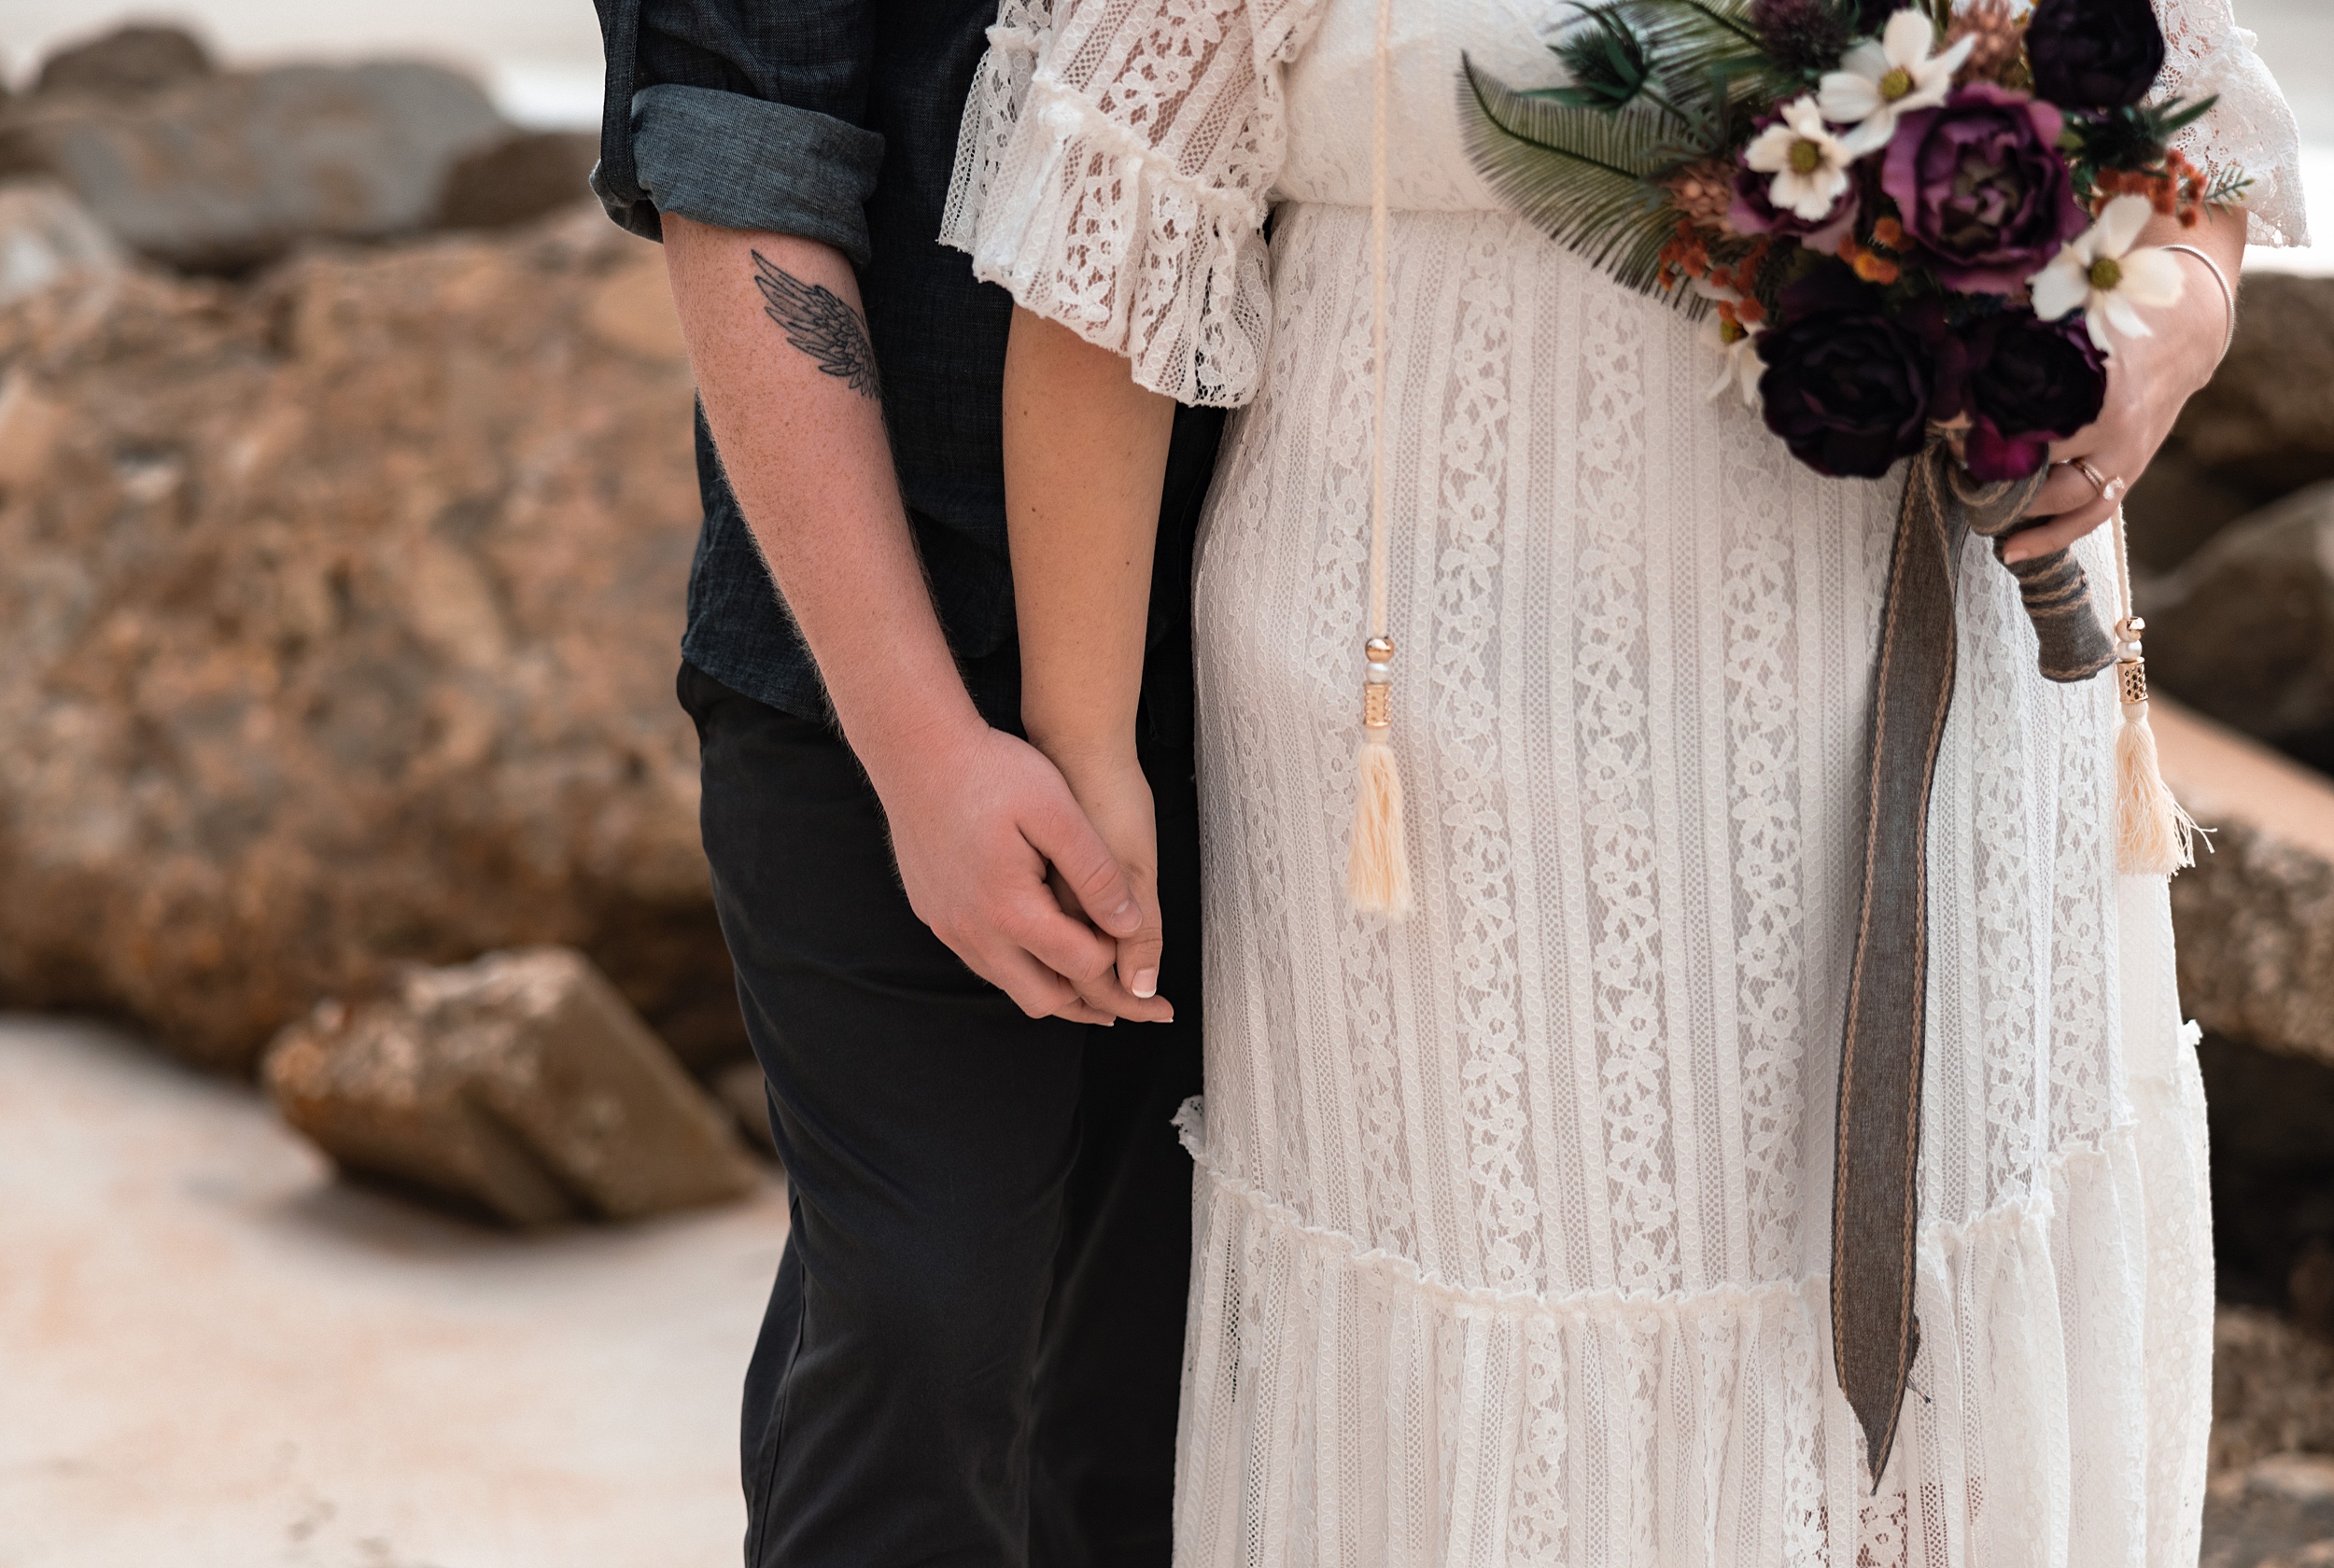 Details of newlyweds holding hands on a beach with a dark rose bouquet